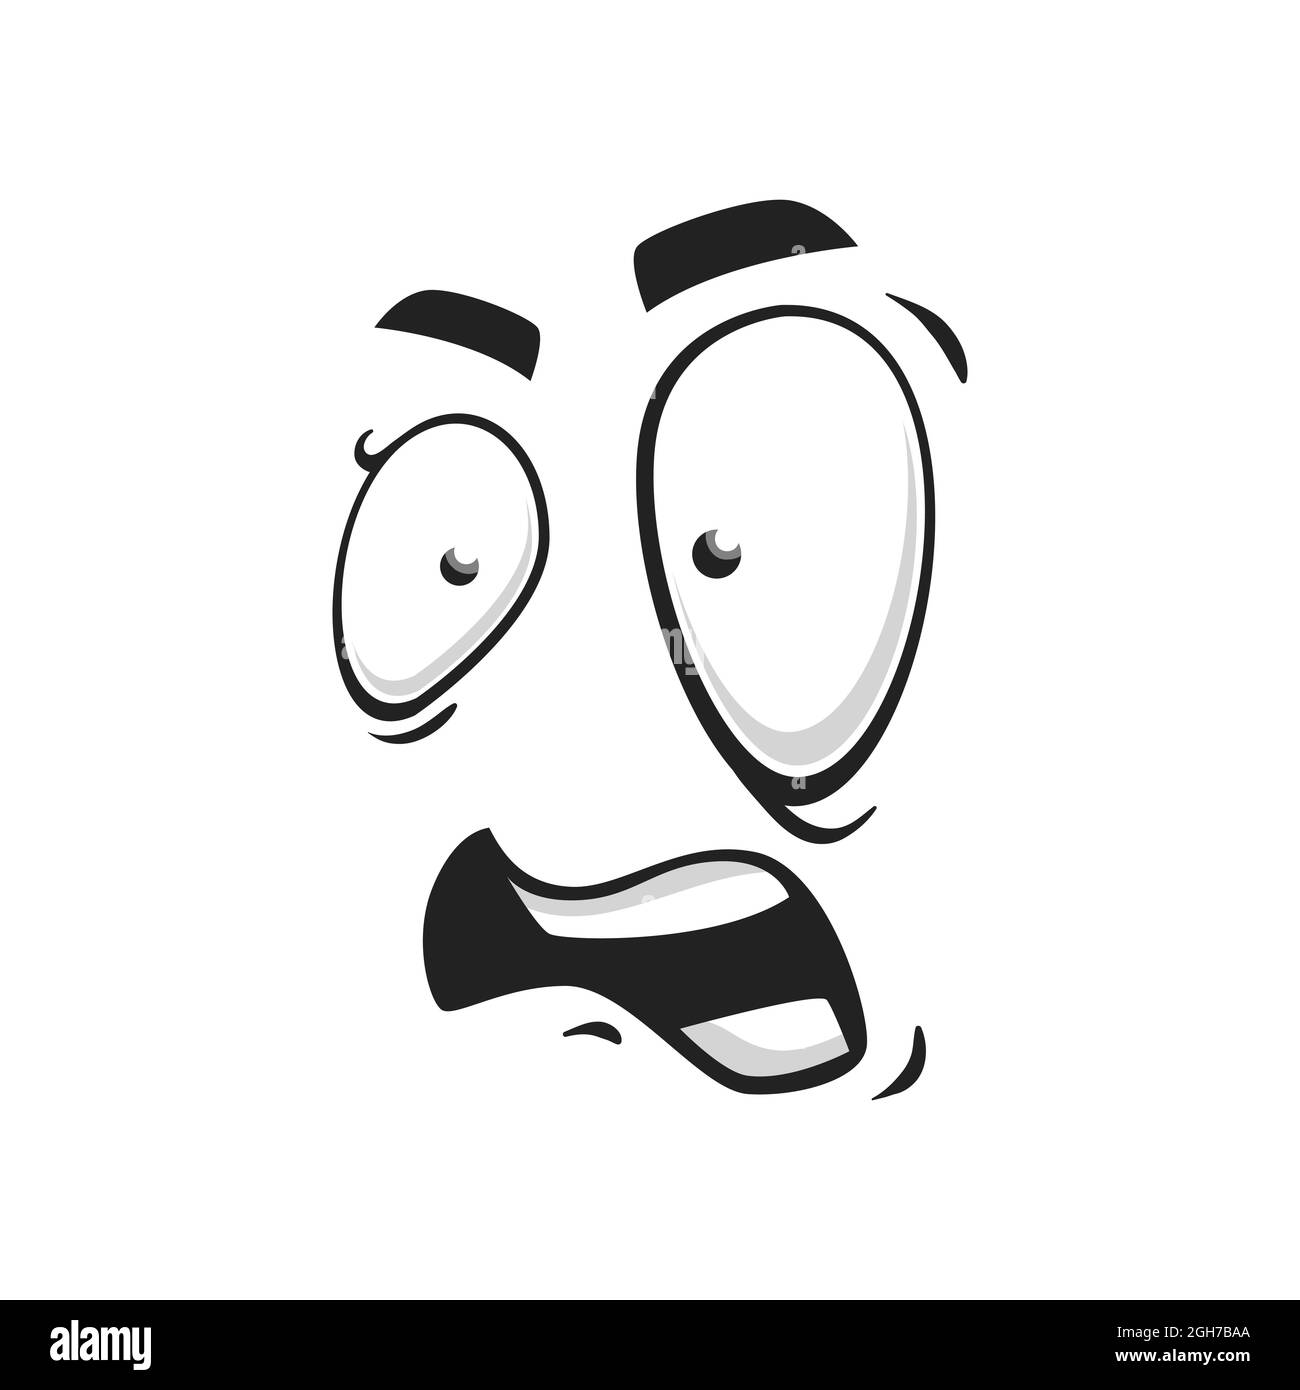 Cartoon scared and surprised face. Scared expression vector illustration., Stock vector